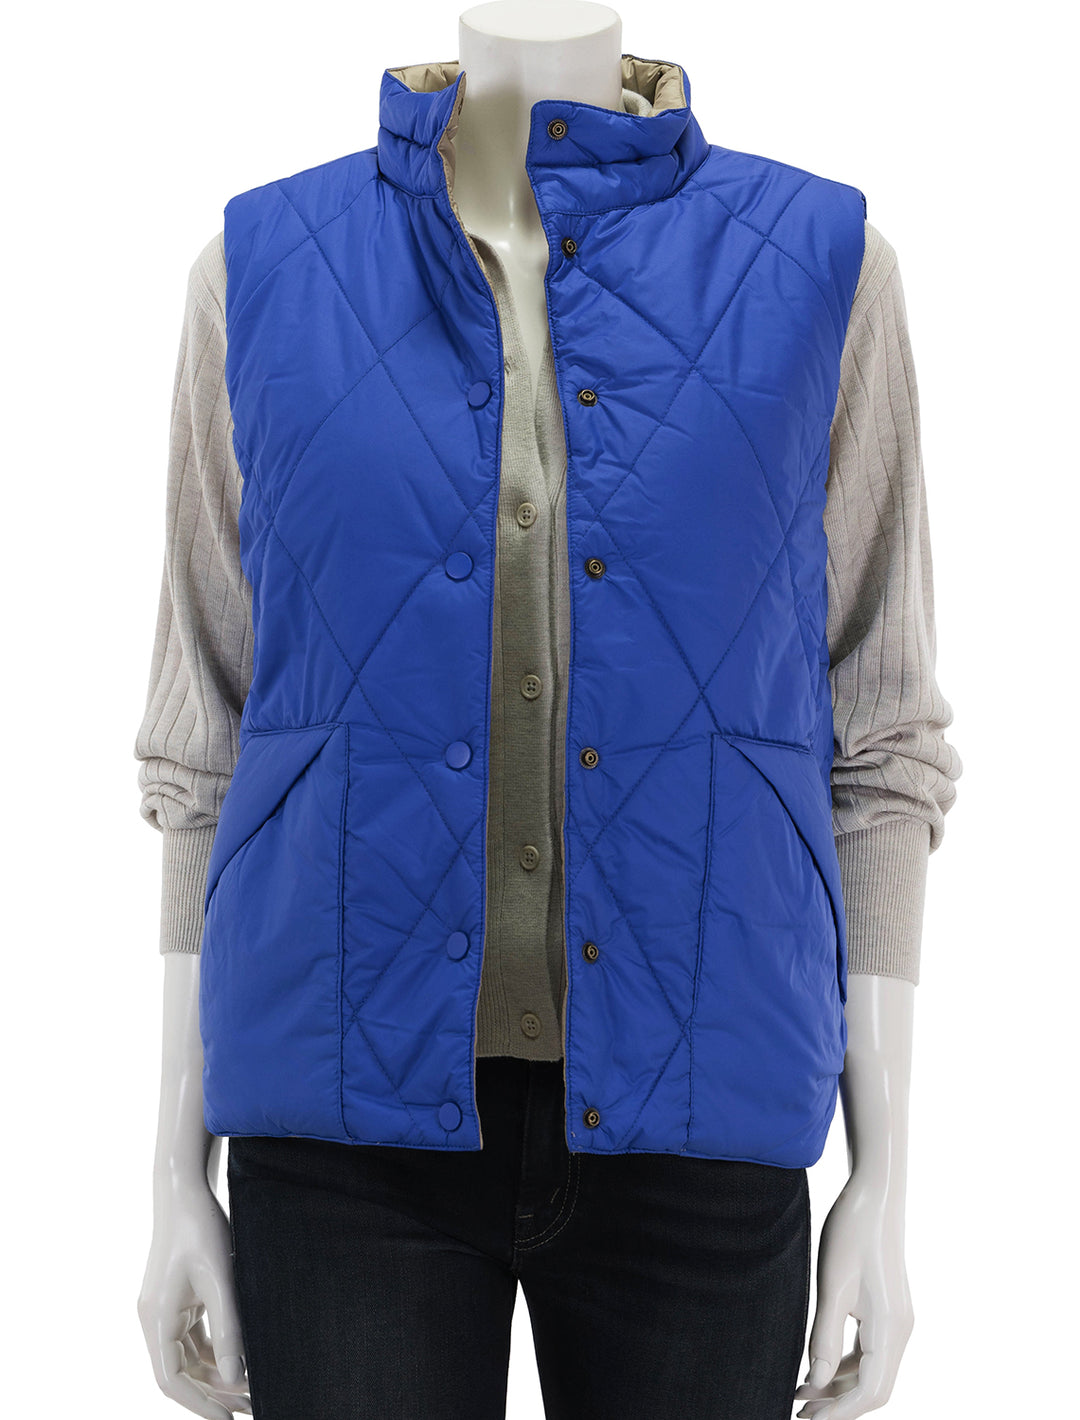 Twigs vest reversible in front – snap sapphire